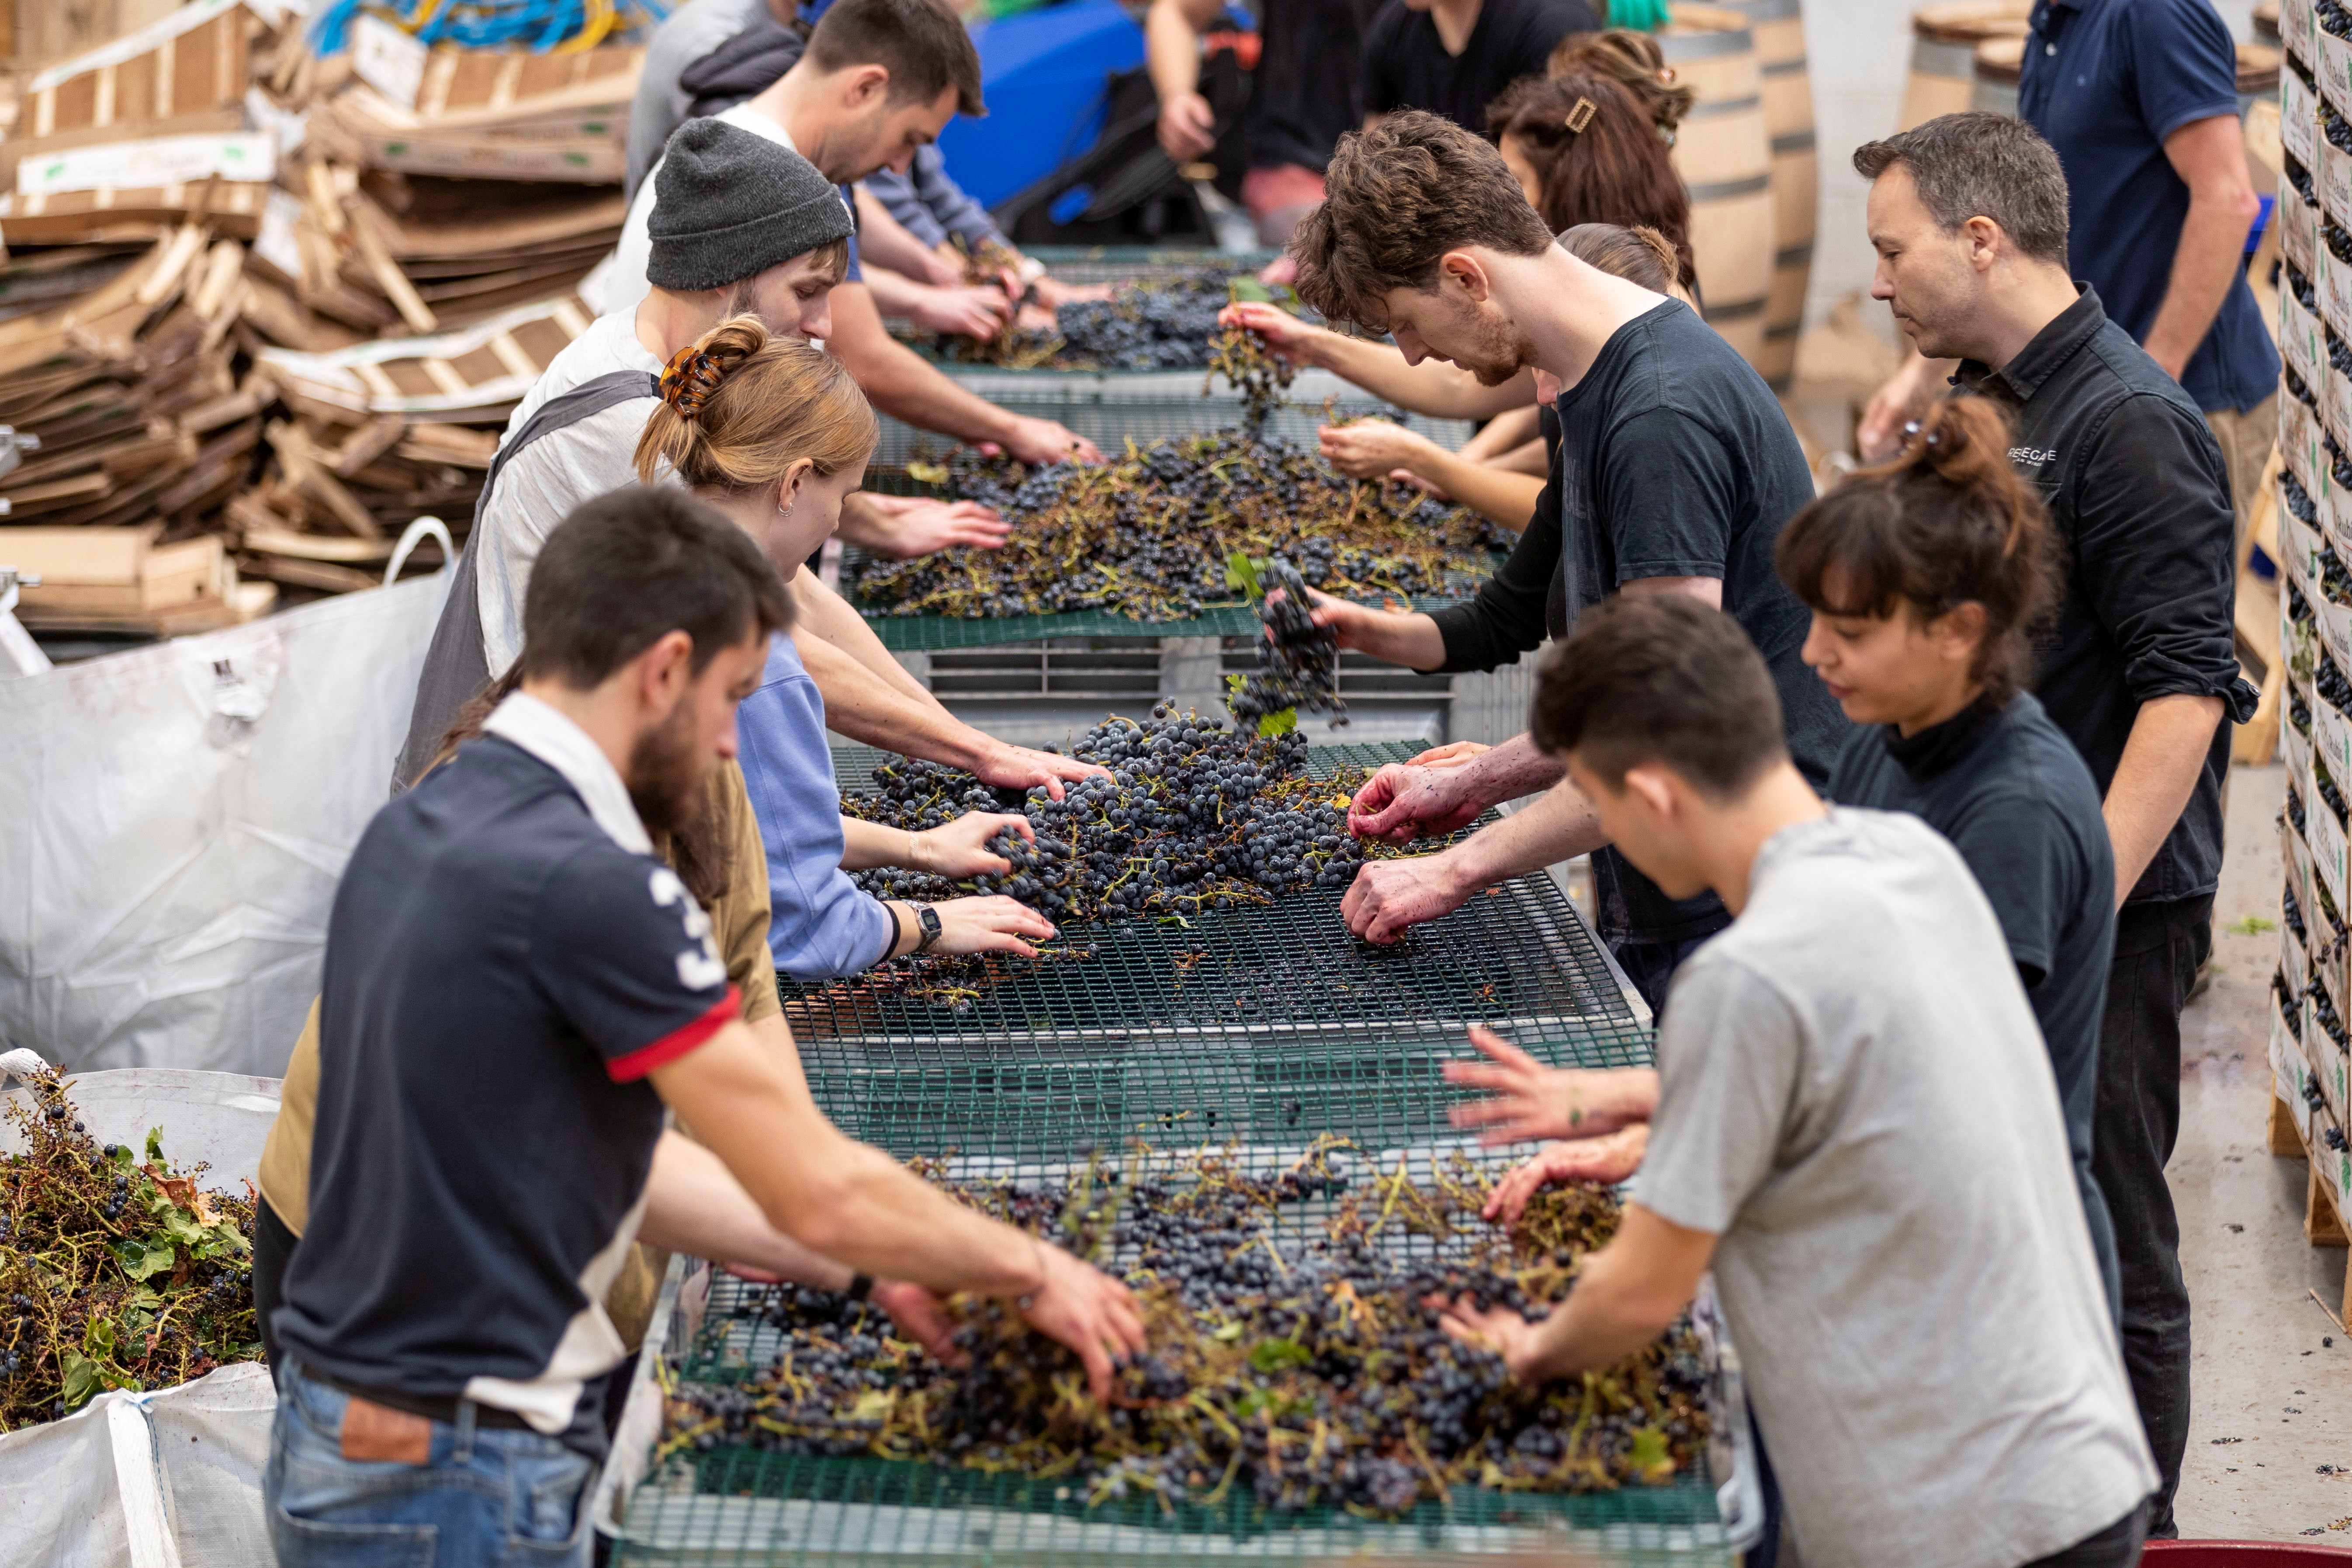 Volunteers help Warwick Smith process grapes at the Renegade Urban Winery in London